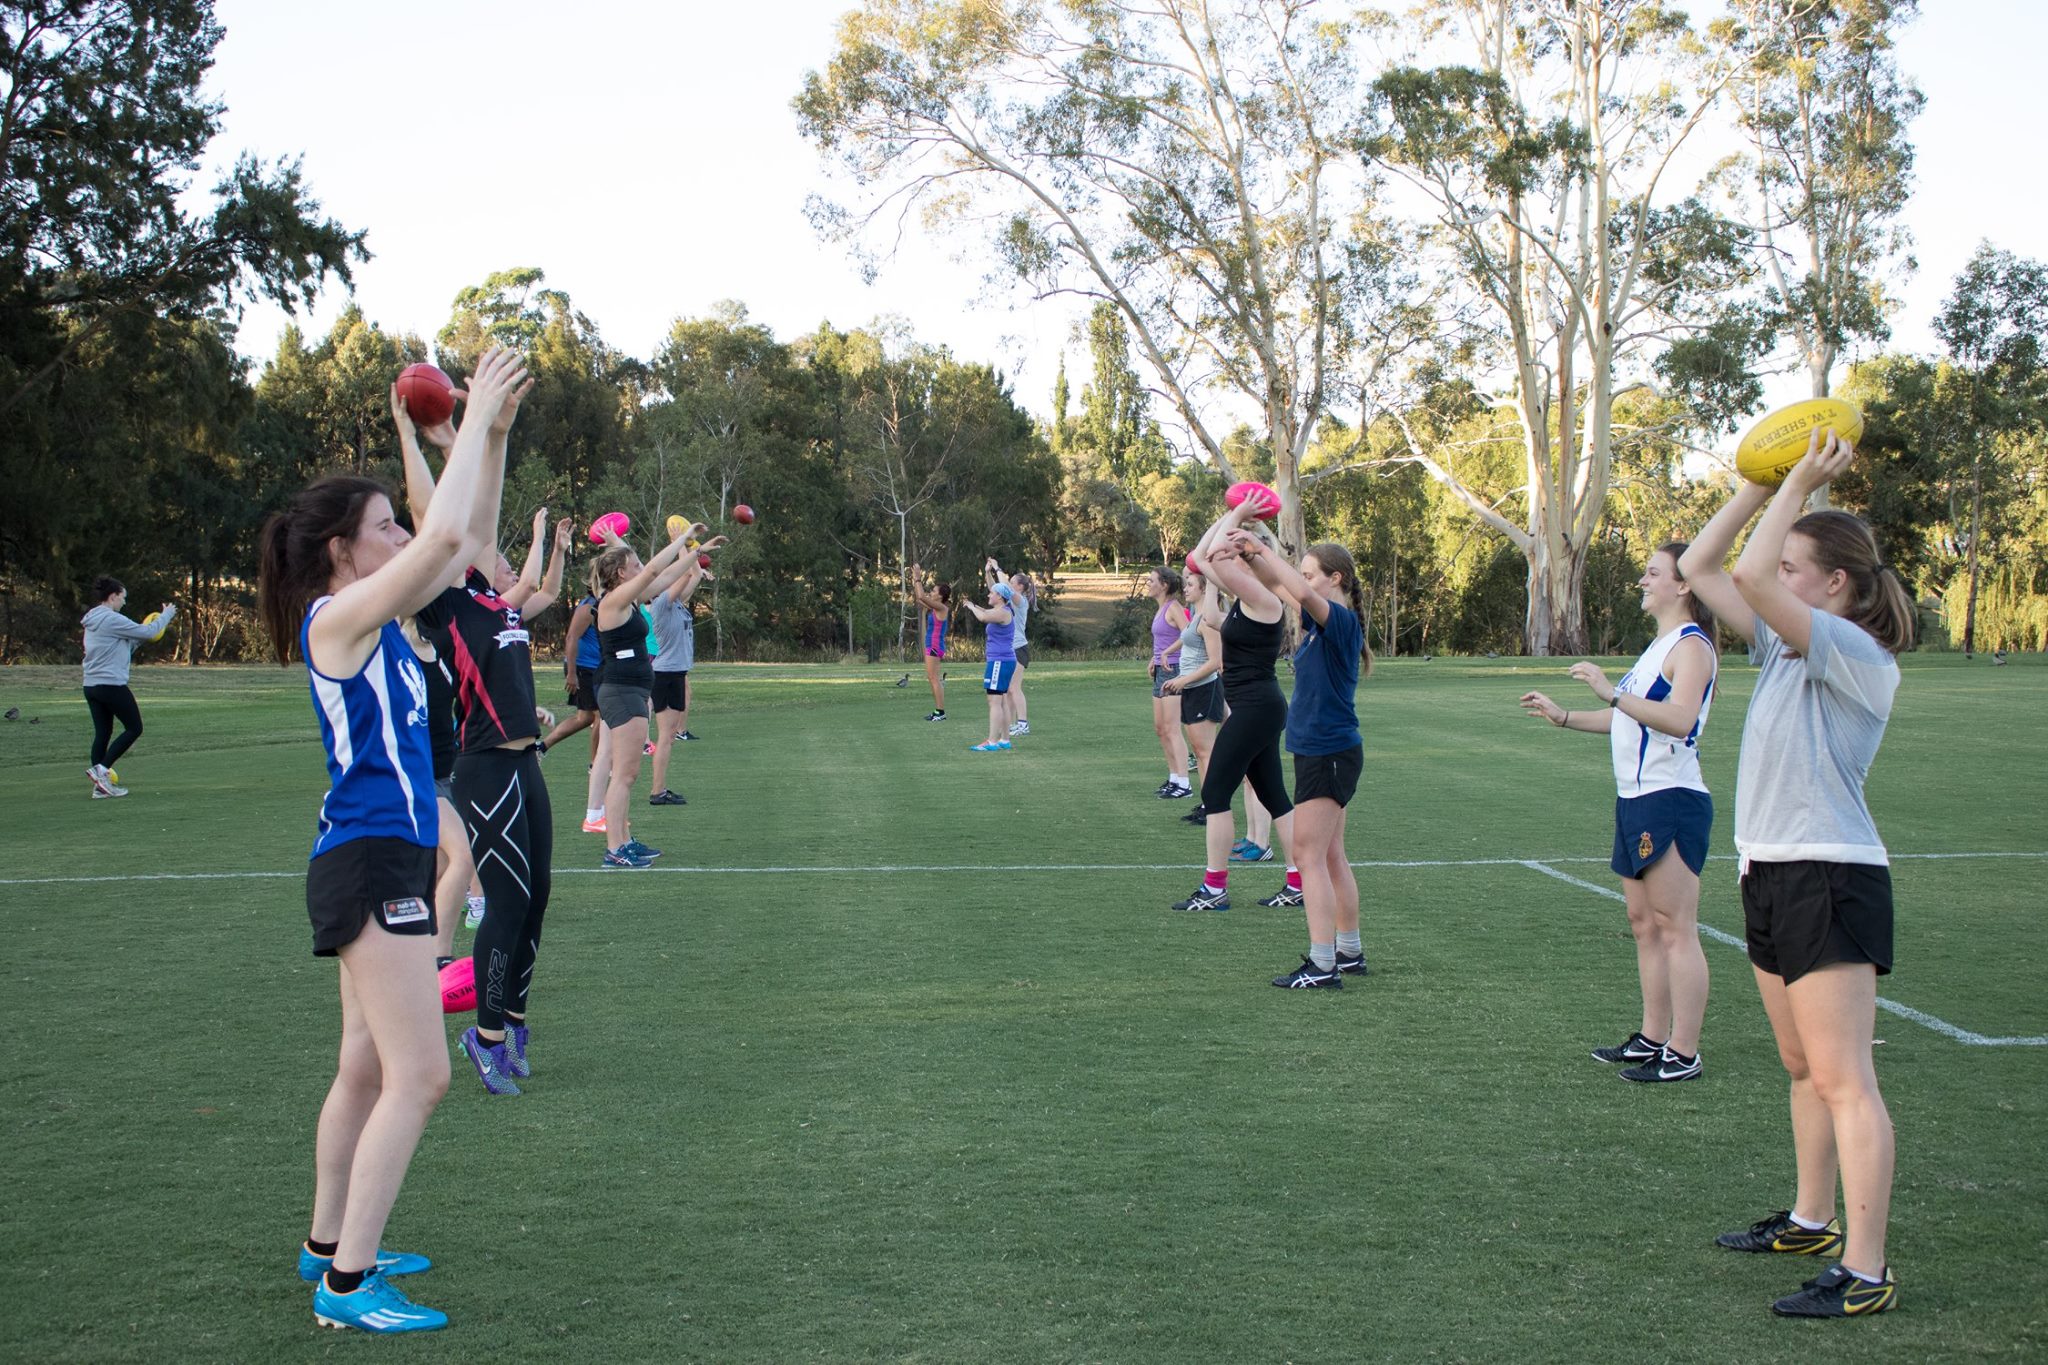 ANUAFC launches Women’s Leadership Scholarship at ANU Market Day